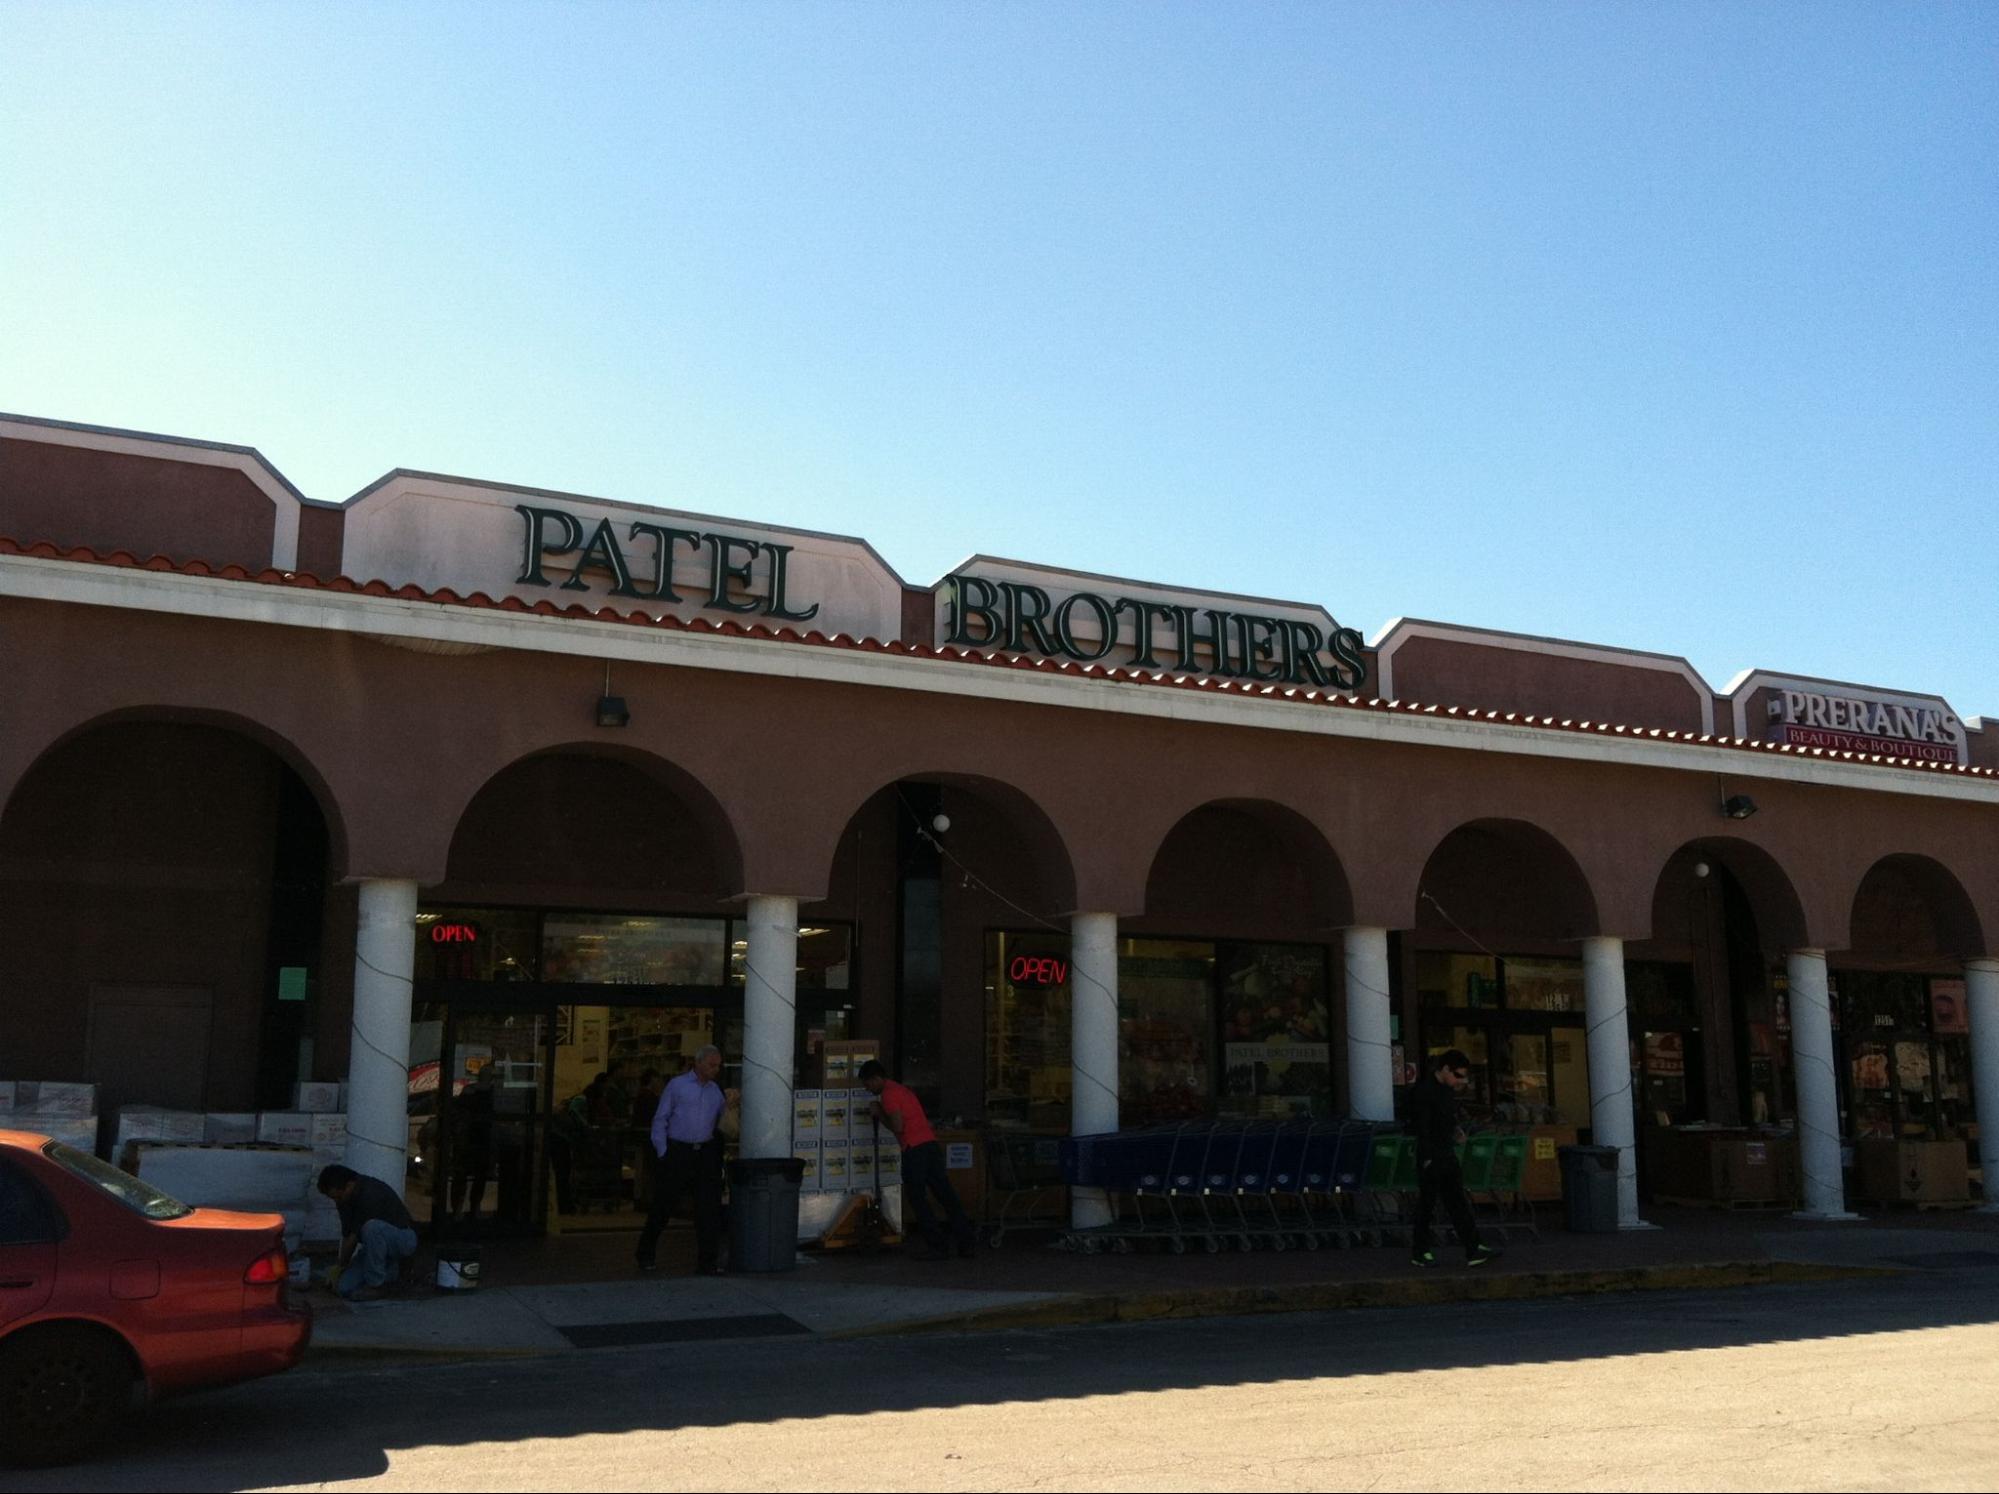 Patel Brothers, an Indian grocery store in Plano, Texas